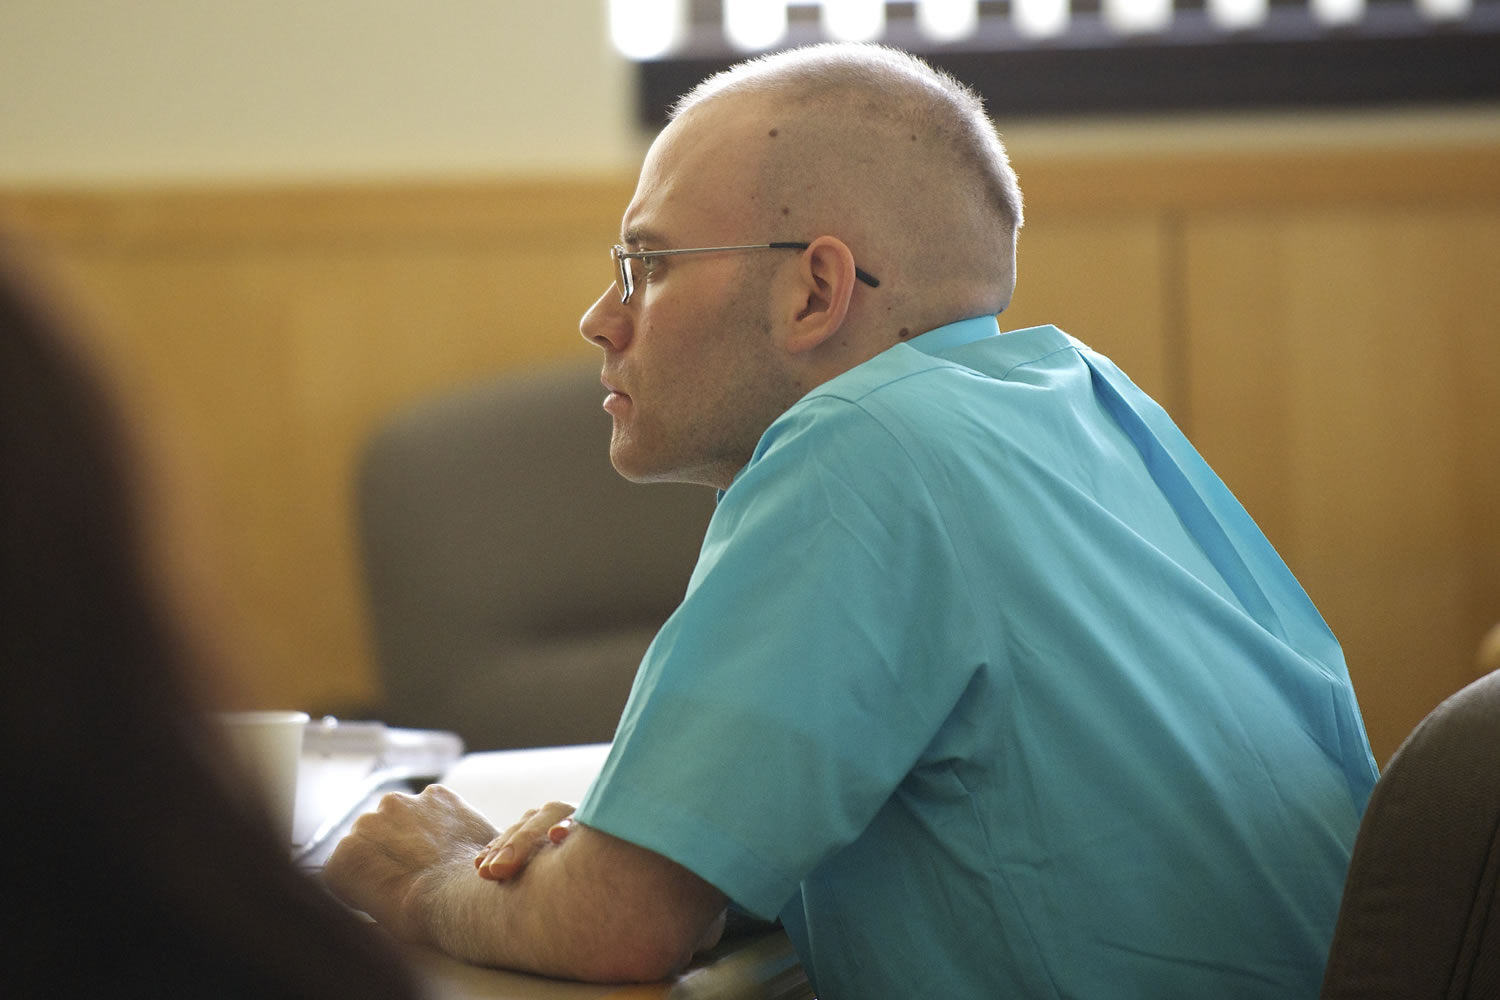 Michael Boswell listens to his former girlfriend answer questions from a prosecuting attorney Monday October 29, 2012 at the Clark County Courthouse in Vancouver, Washington.